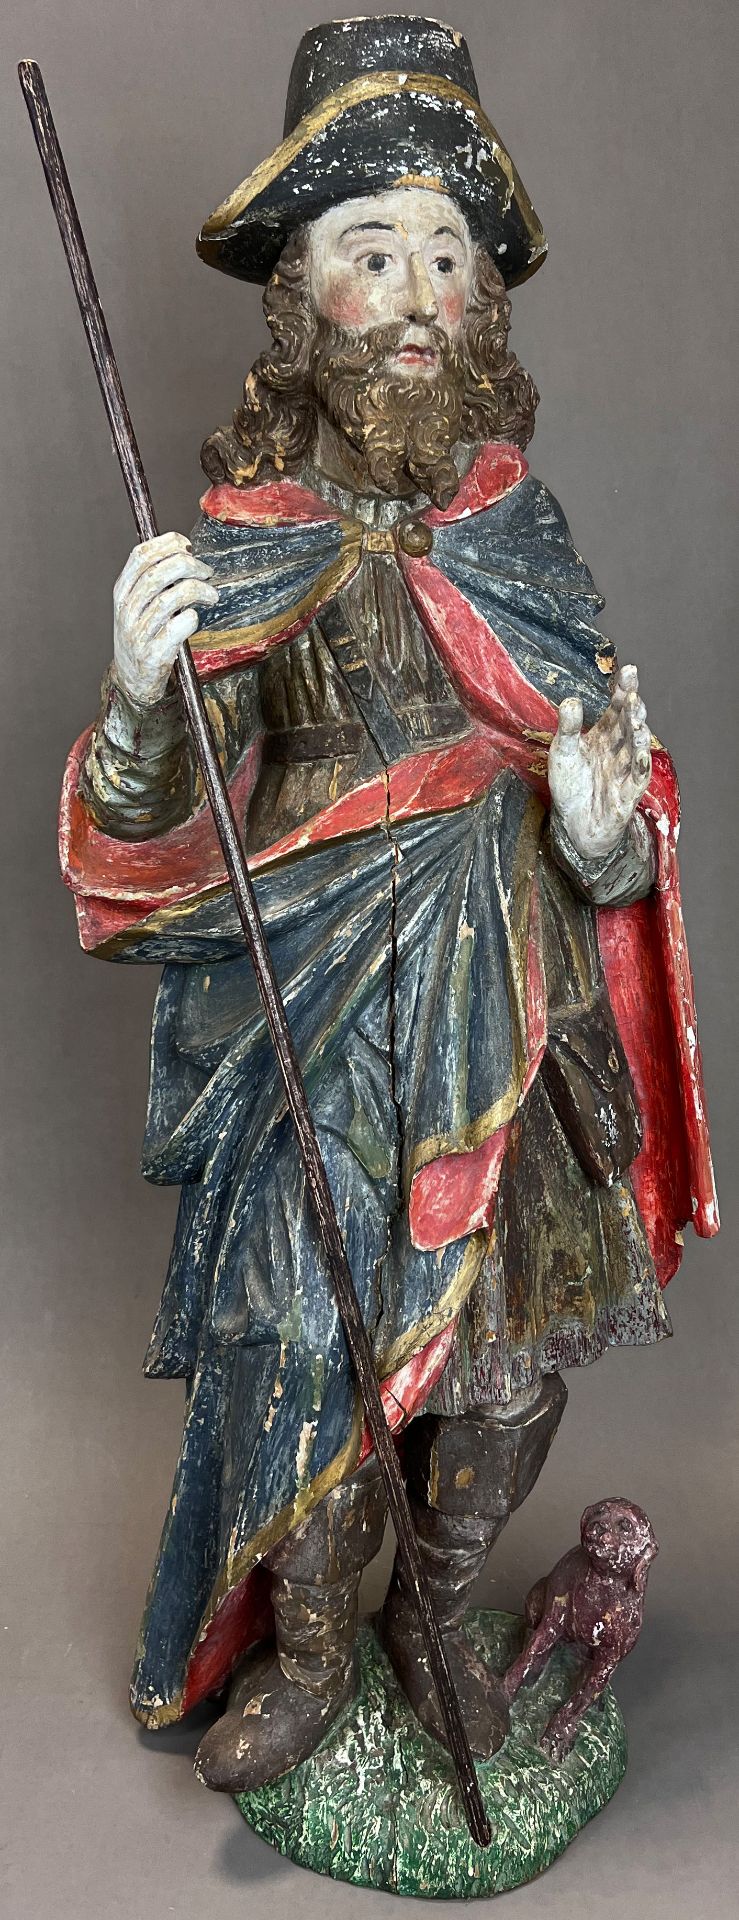 Wooden figure. St Peter Claver Apostle of the Negroes. 17th century. Flemish Brabant.